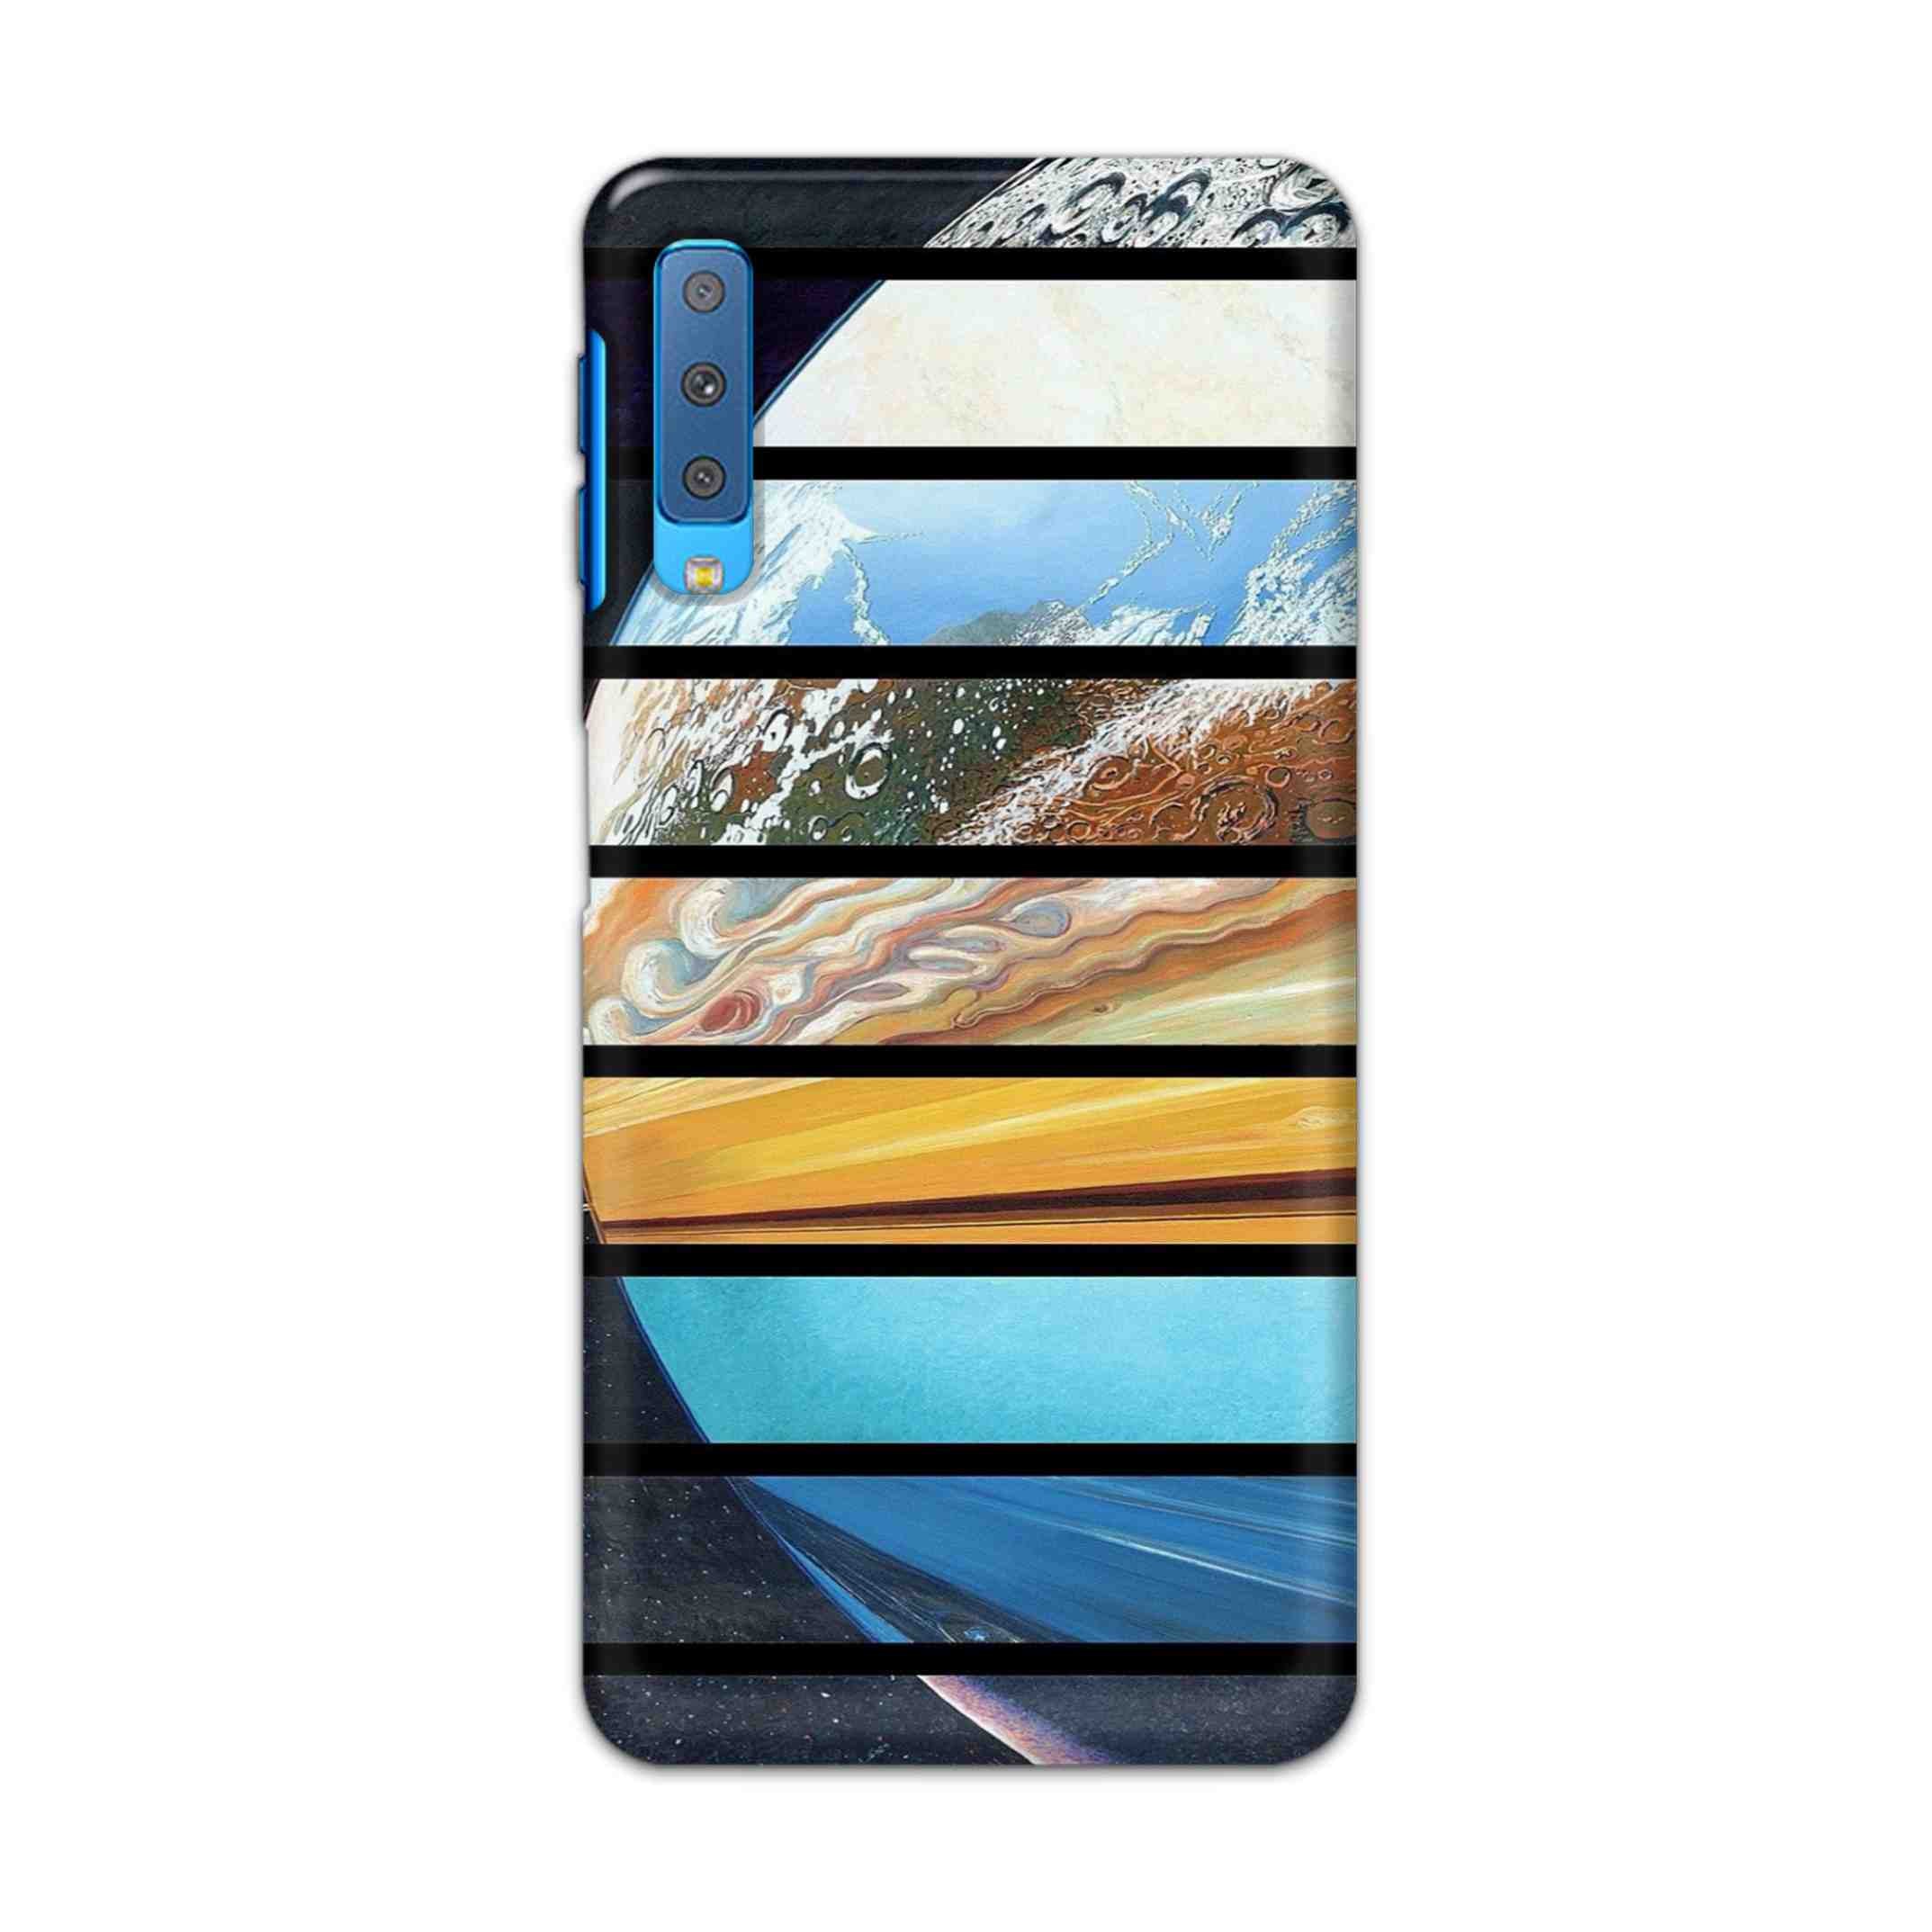 Buy Colourful Earth Hard Back Mobile Phone Case Cover For Samsung Galaxy A7 2018 Online